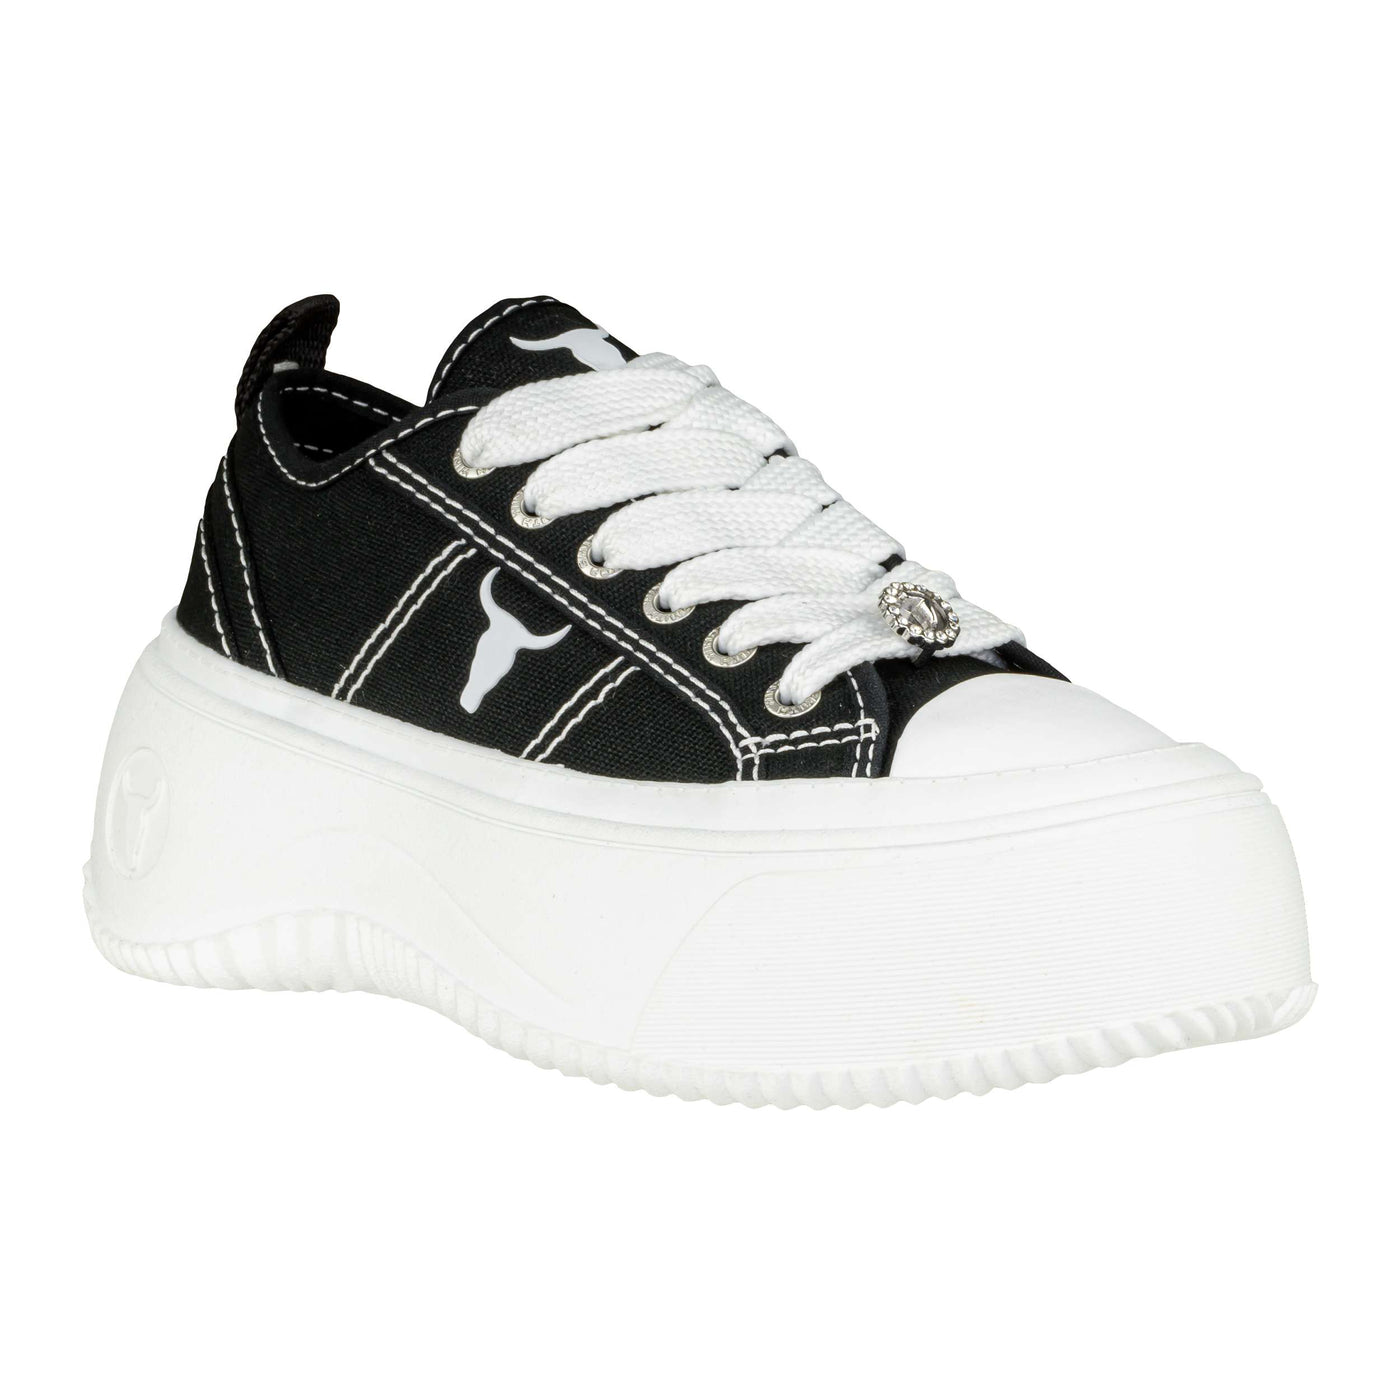 WINDSOR SMITH INTENTIONS BLK/WHT